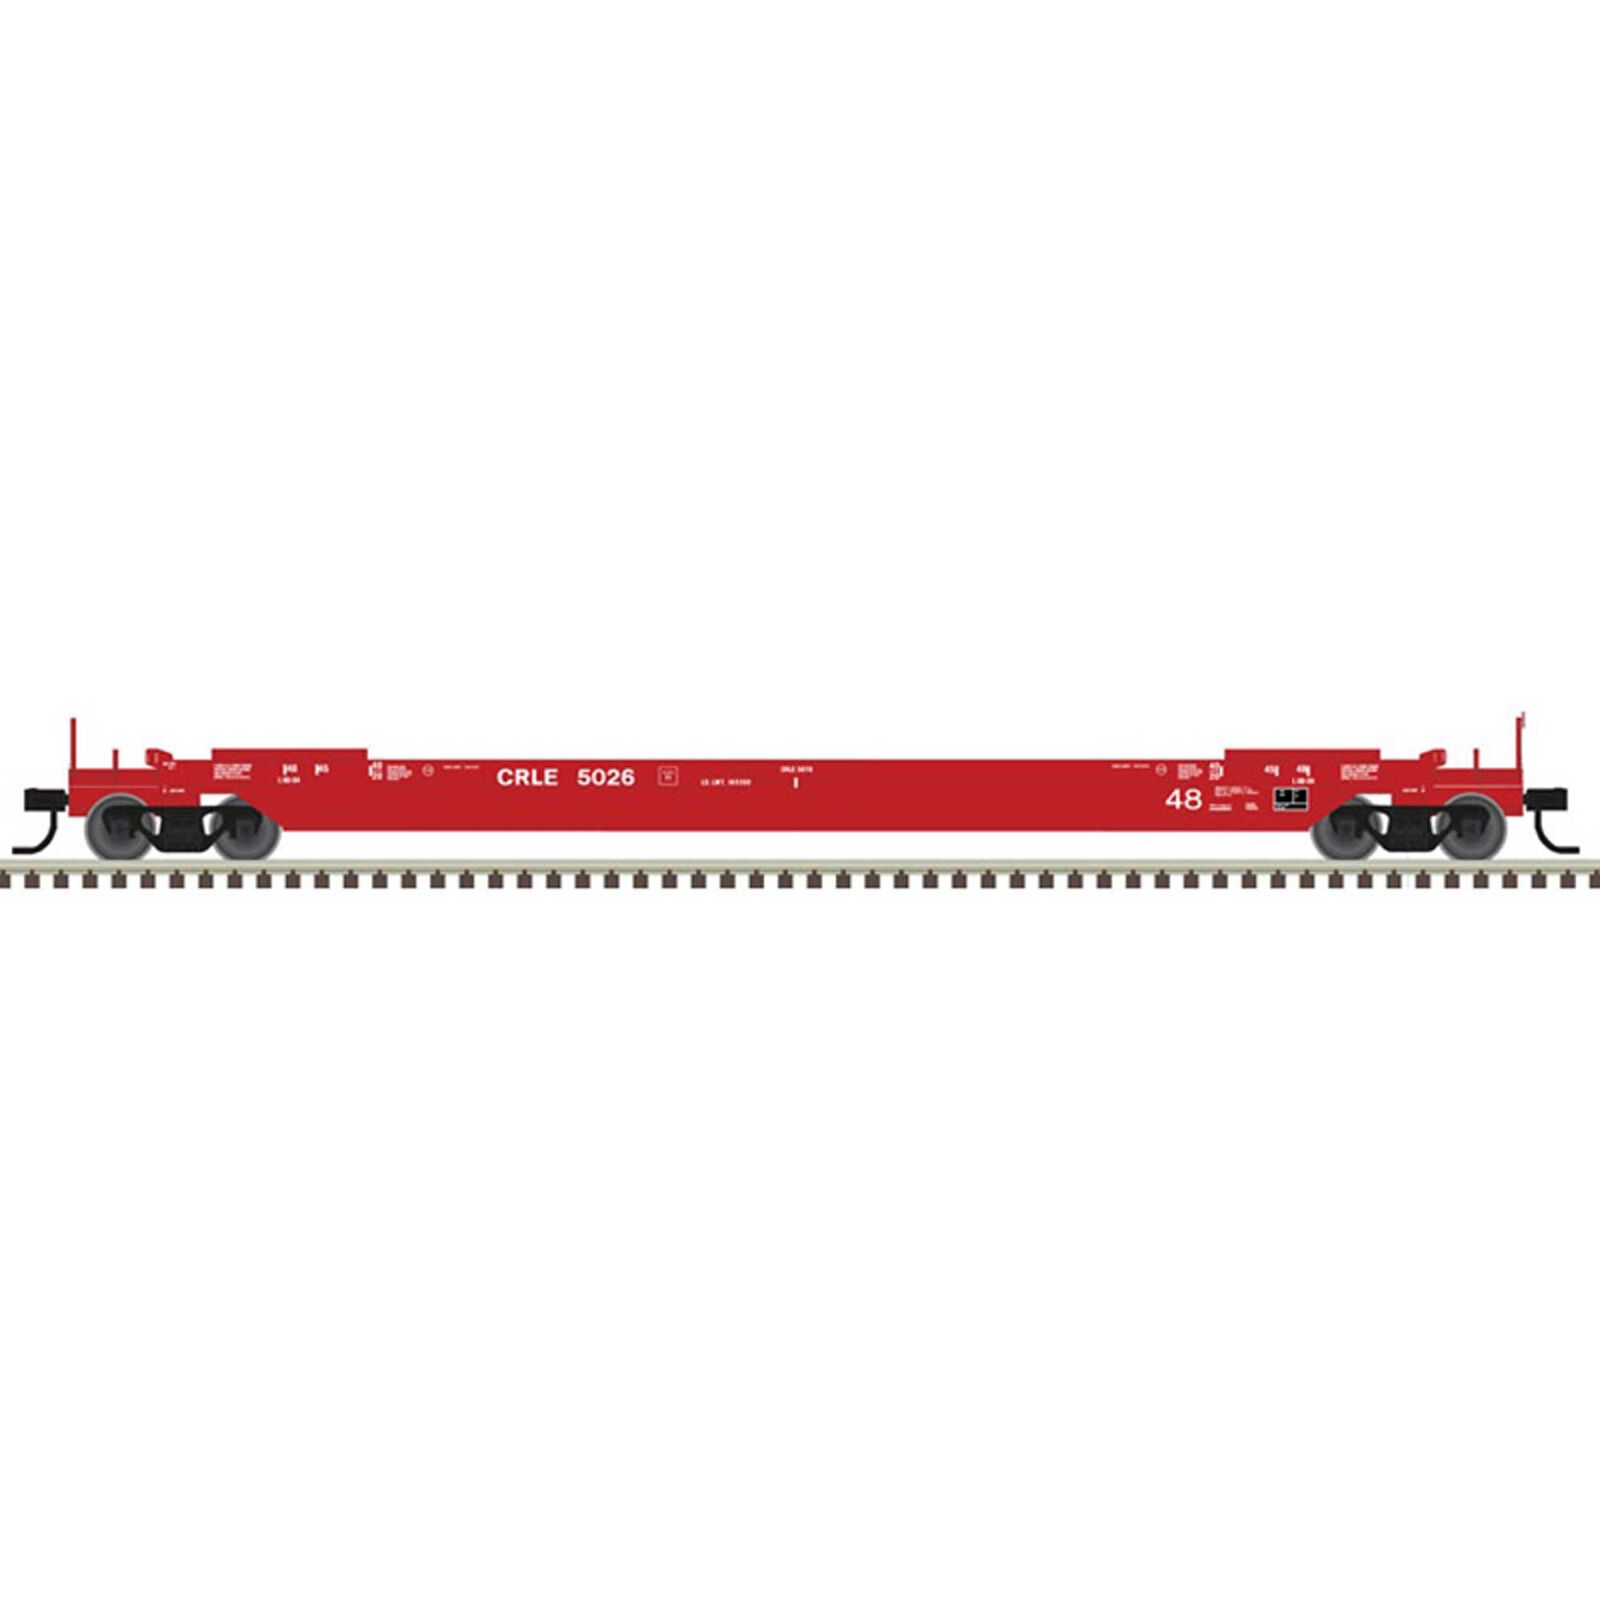 HO 48' All Purpose Well Car CRLE #5050, Red/White